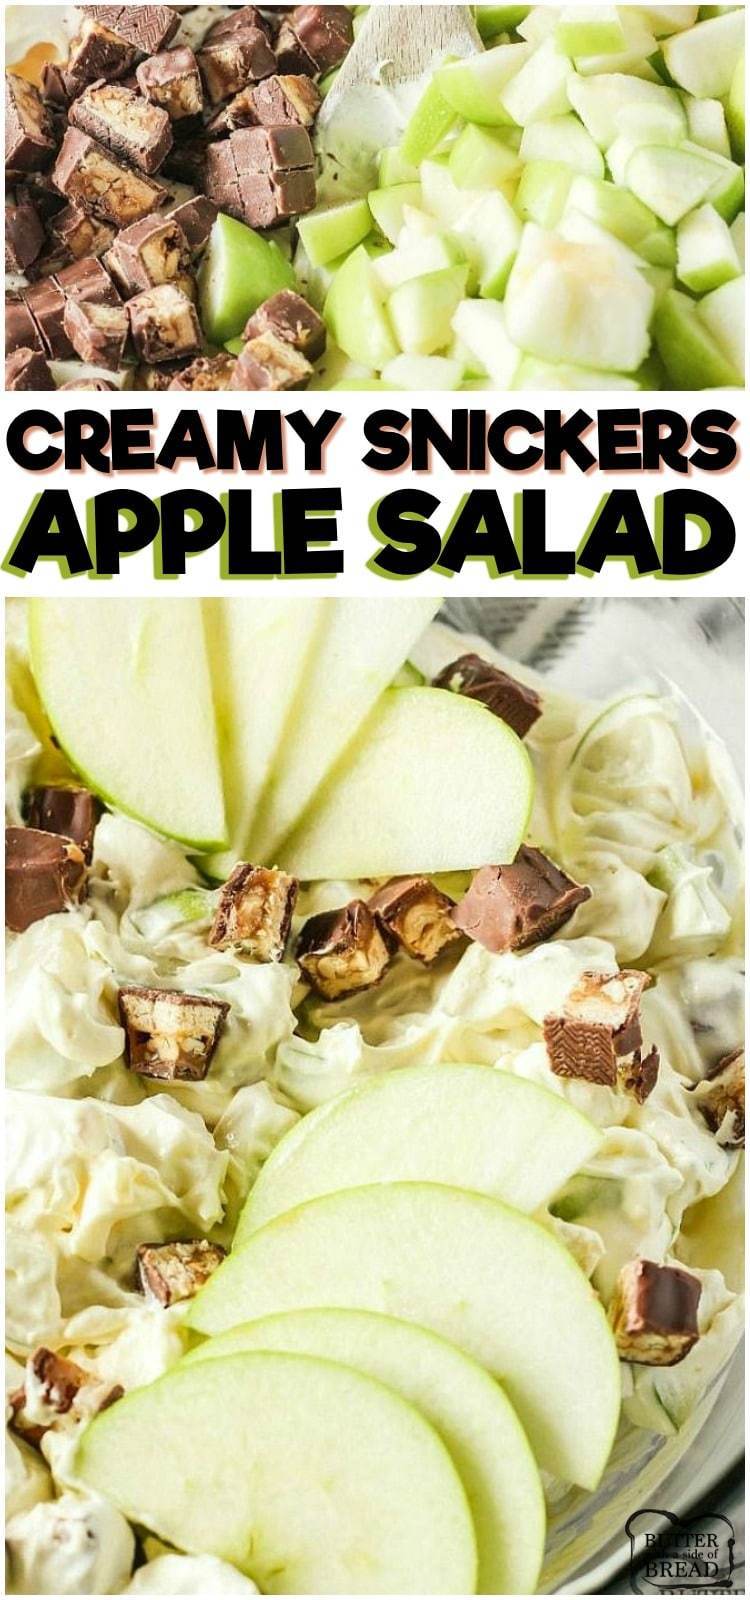 Snickers Apple Salad Recipe is a sweet side dish loaded with tart green apples, vanilla pudding, whipped topping and, of course, Snickers bars! Snicker Salad is a fruit salad recipe that is always requested over and over! #snickers #salad #apples #fluff #recipe from BUTTER WITH A SIDE OF BREAD